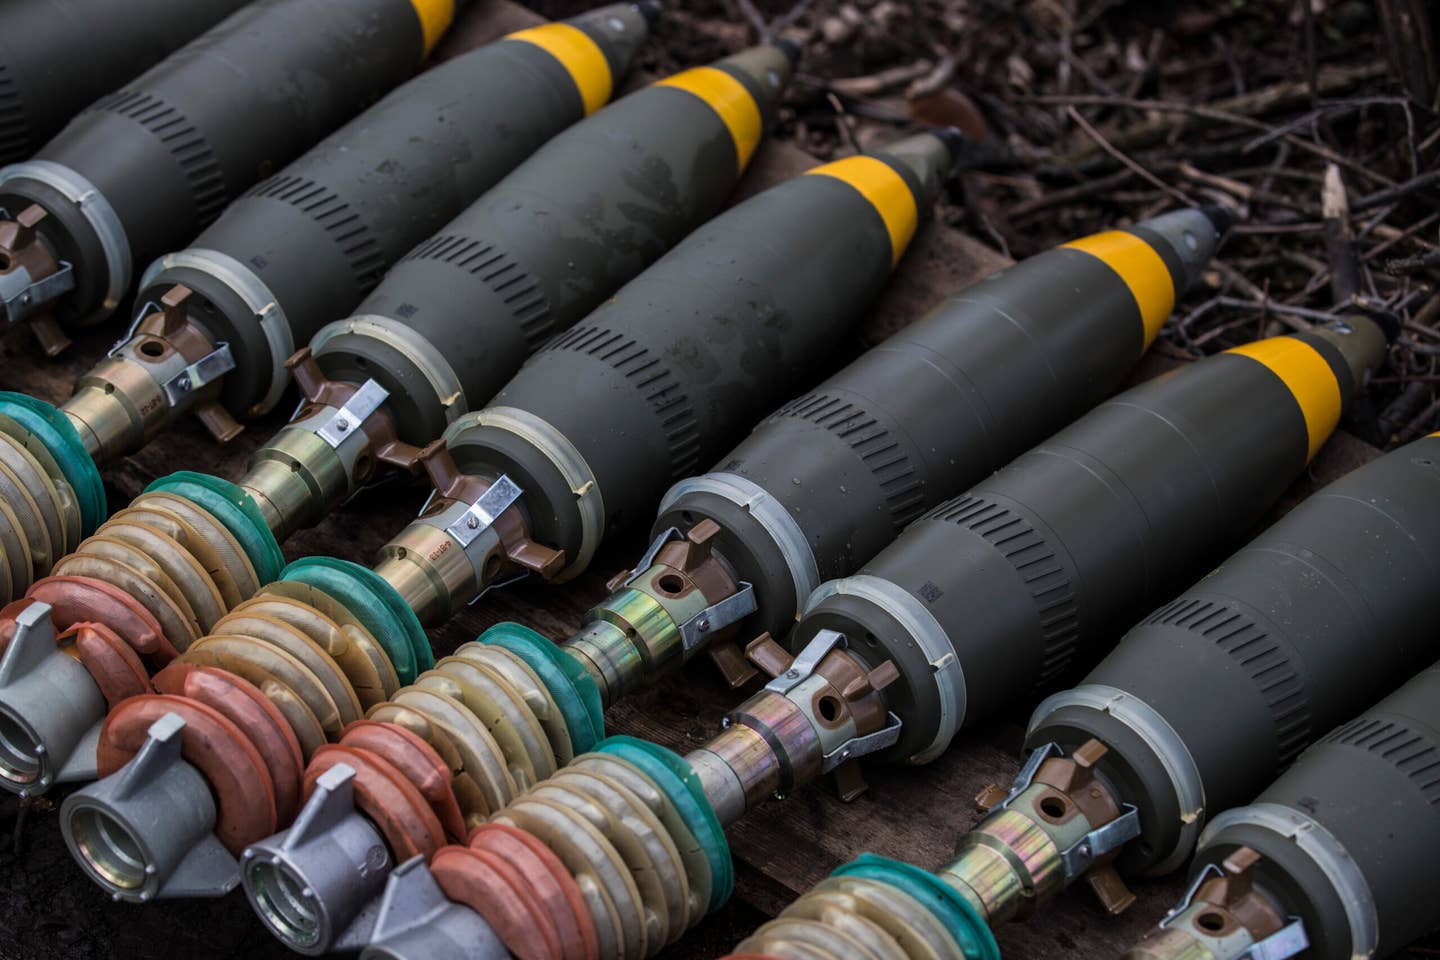 Ukrainian mortar rounds with propellant rings lie on the ground on April 24, 2023, in the Donetsk region, eastern Ukraine. <em>Photo by Yuriy Mate/Global Images Ukraine via Getty Images</em>